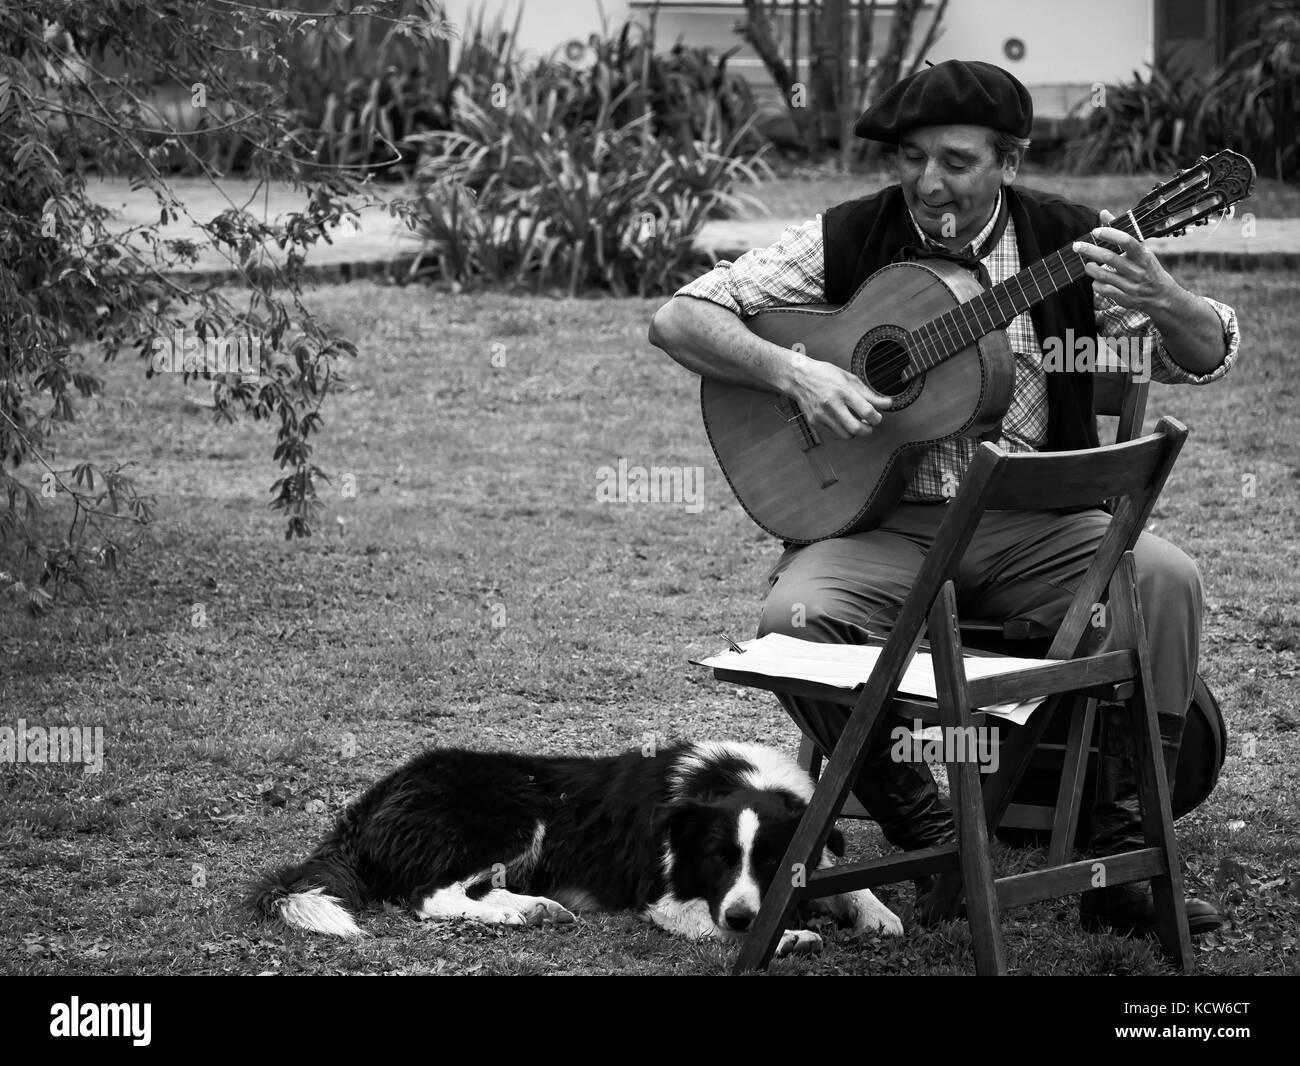 Gaucho singer Black and White Stock Photos & Images - Alamy